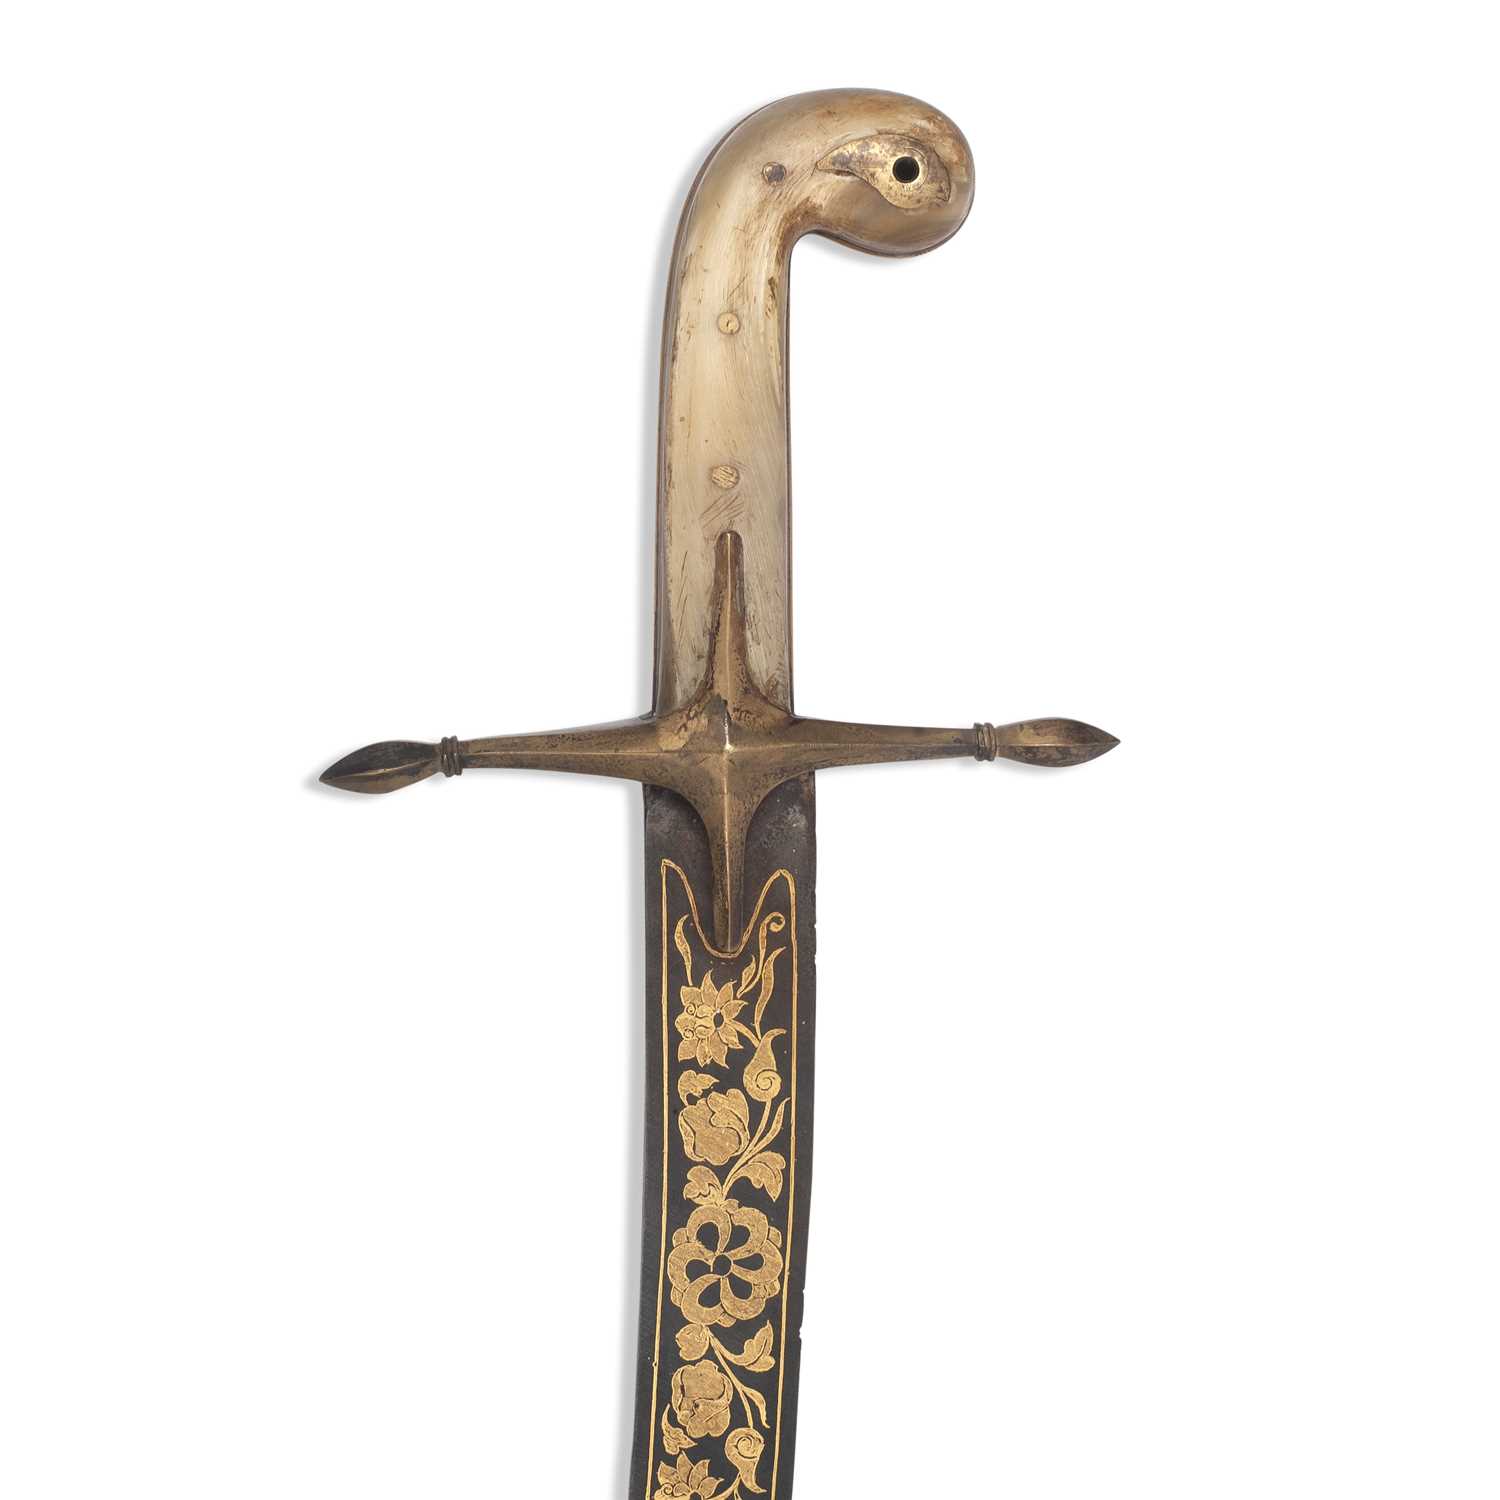 A LATE 18TH / EARLY 19TH CENTURY OTTOMAN (TURKEY) GOLD DAMASCENED SWORD (SHAMSHIR) - Image 5 of 5